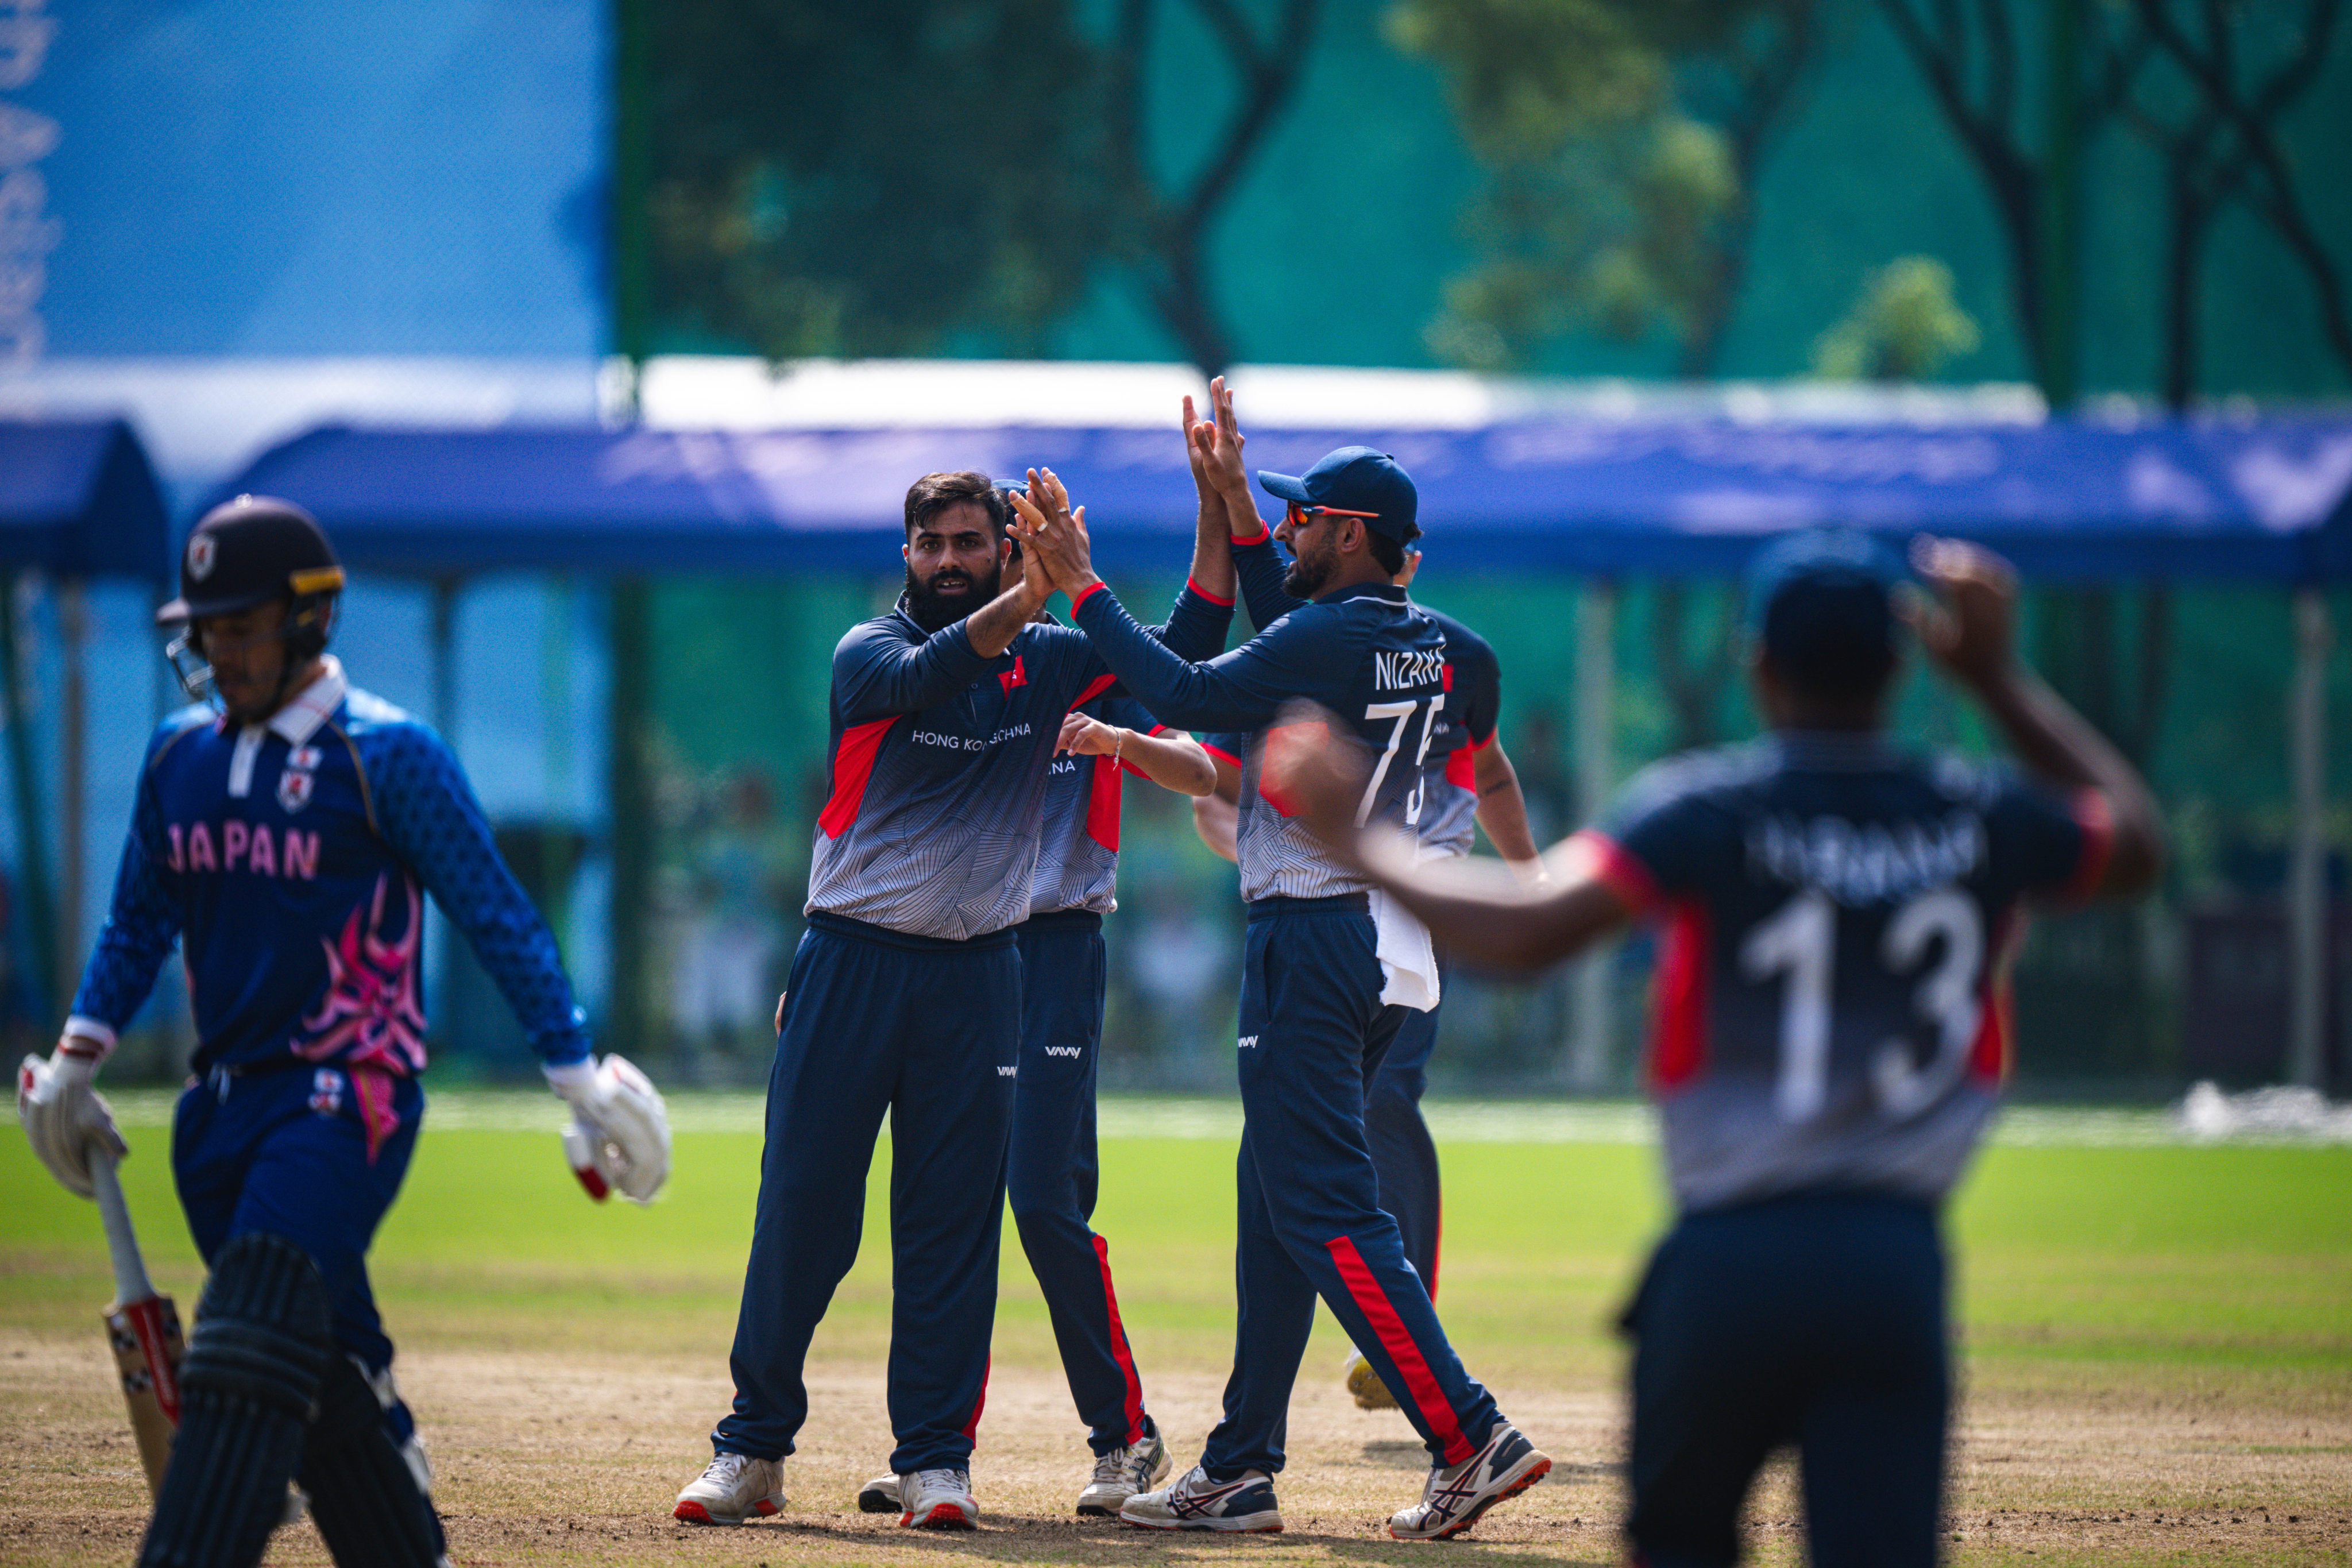 Hong Kong overcame Kuwait for a stellar start to their T20 World Cup qualification quest. Photo: SF&OC